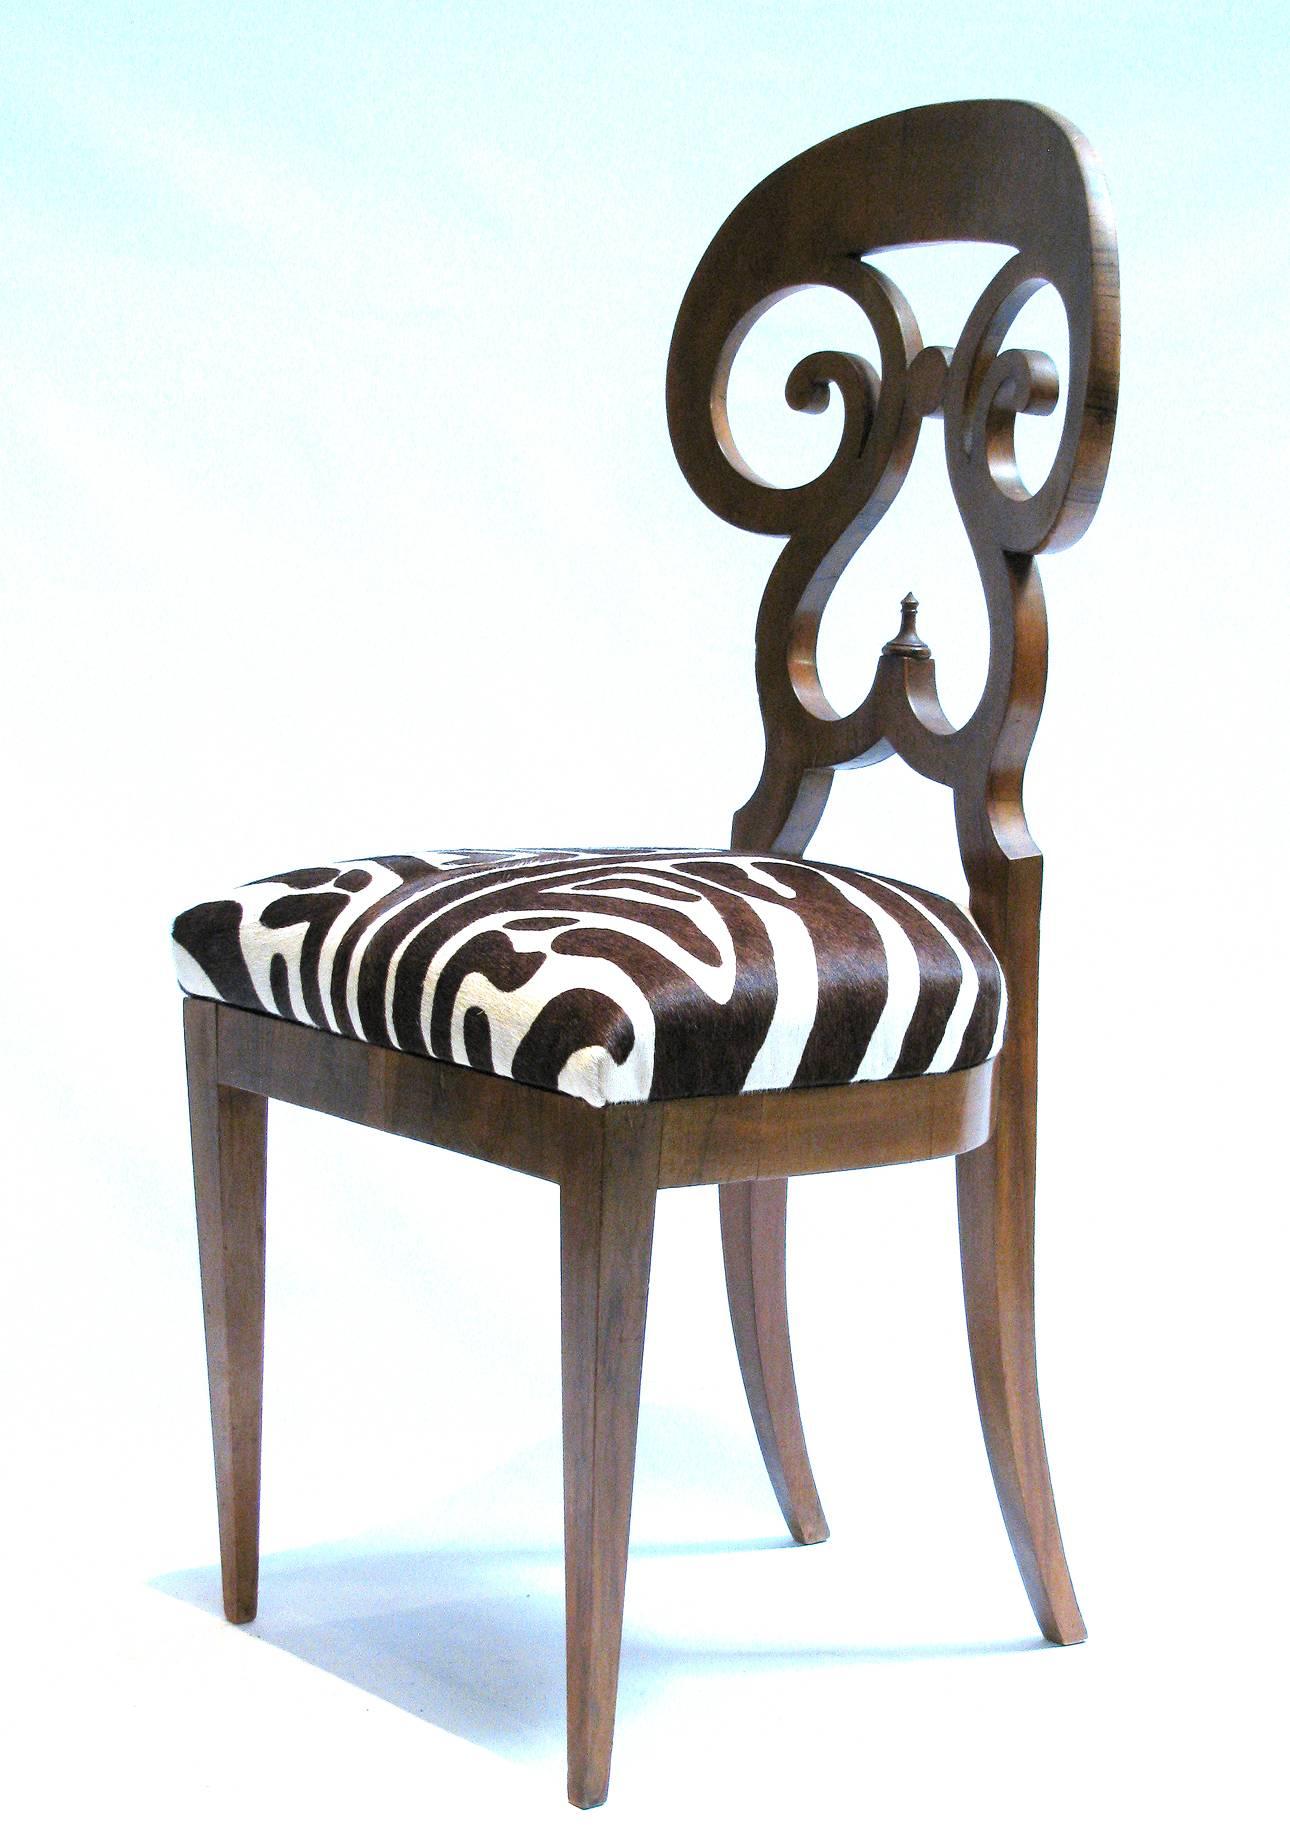 Italian Biedermeier double scroll side chair

Heavy walnut veneered wood with zebra print hair hide seat. 

An example of this chair is featured on page number 215, 